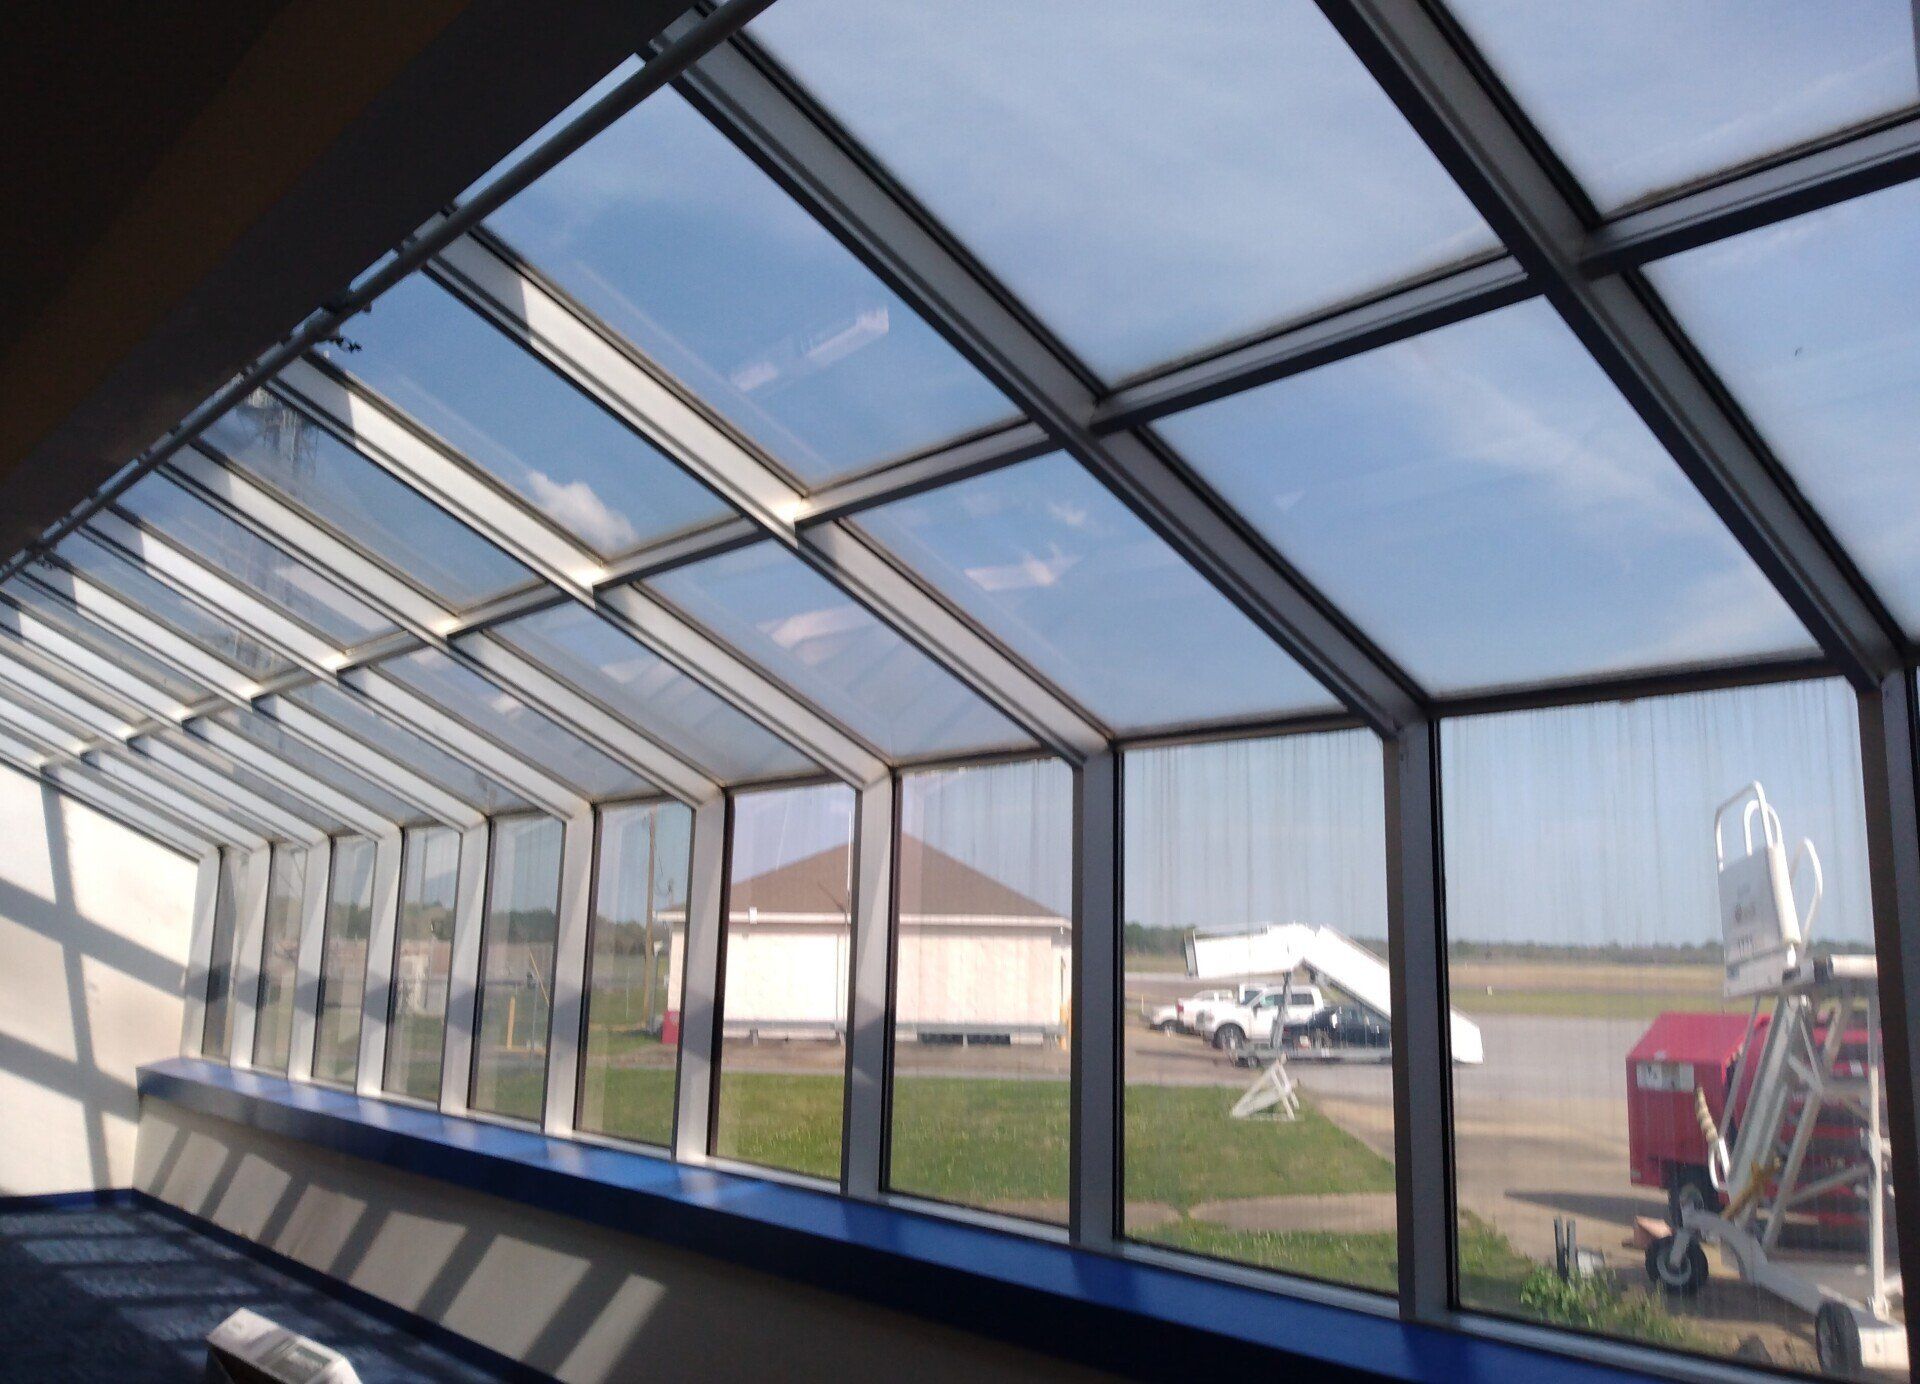 window tinting - Energy Efficient Window Tint installed blocking maximum heat at the Airport in Montgomery AL